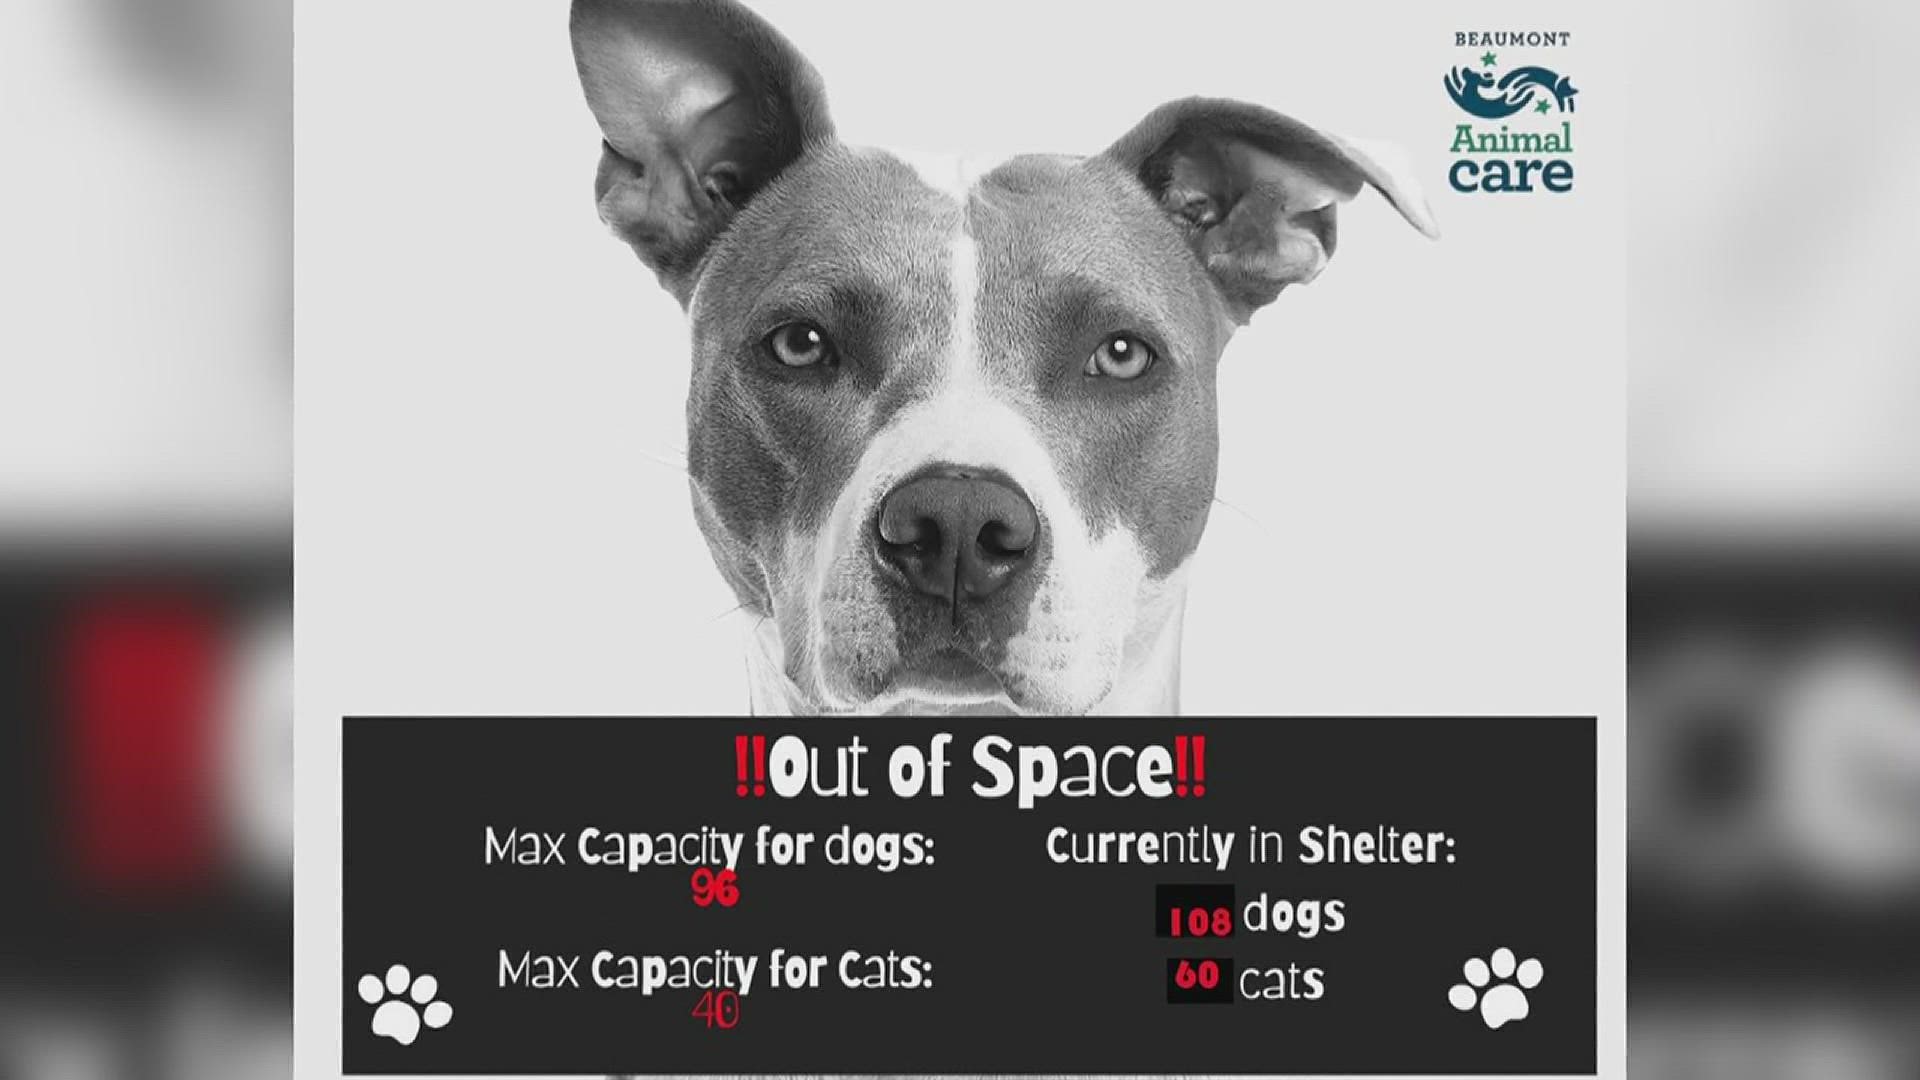 At maximum capacity, the shelter can hold 96 dogs and 46 cats.